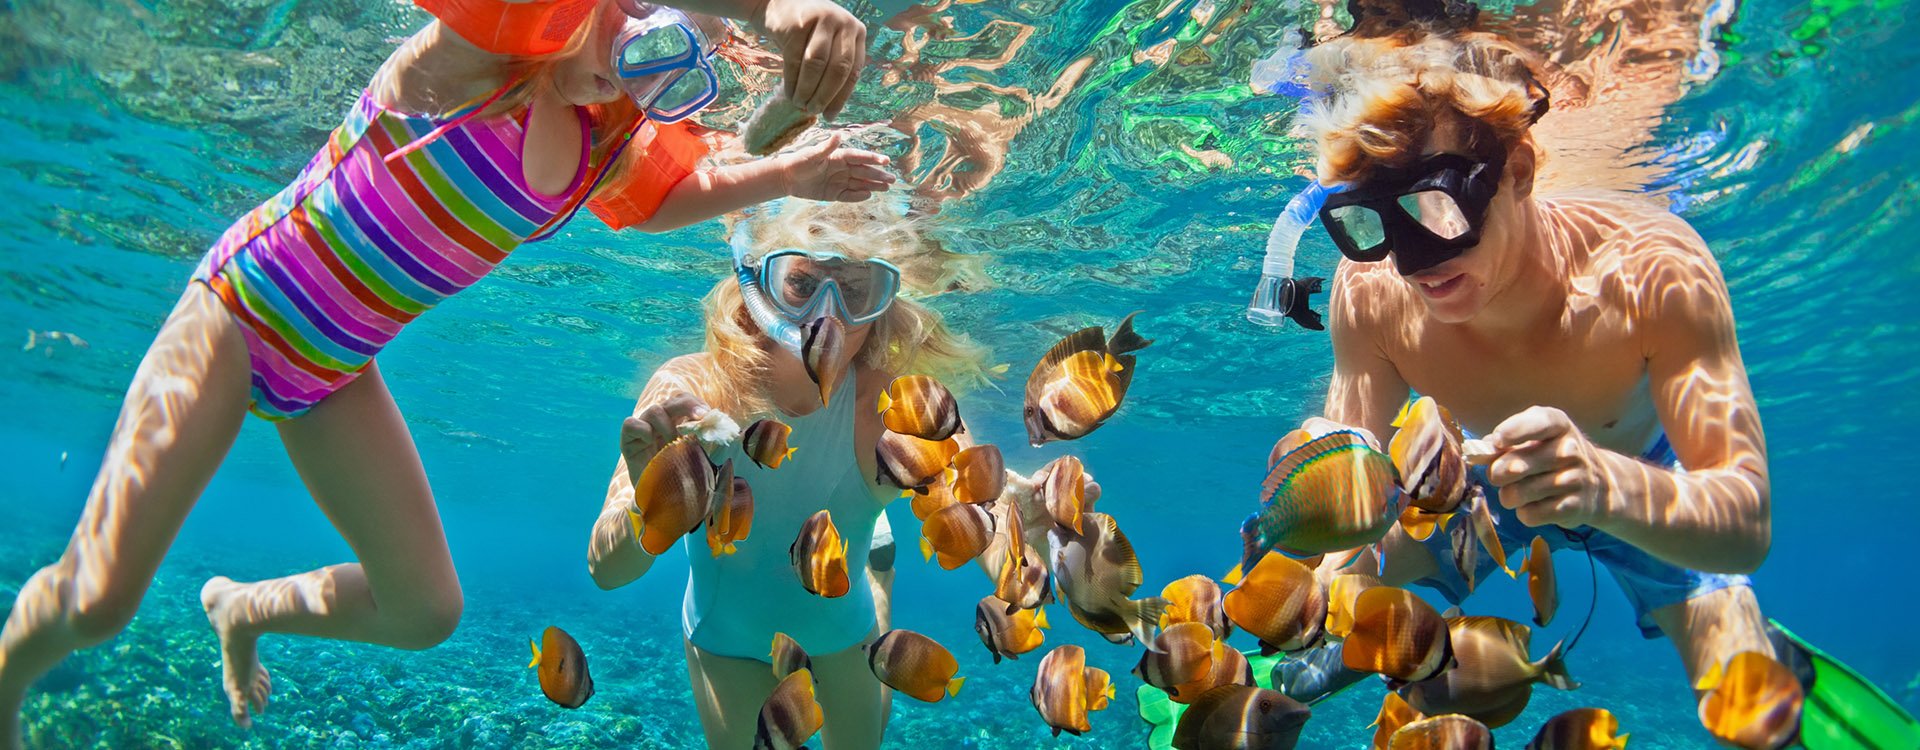 Happy family - mask dive underwater with tropical fishes in coral reef sea pool. summer beach holiday with kids